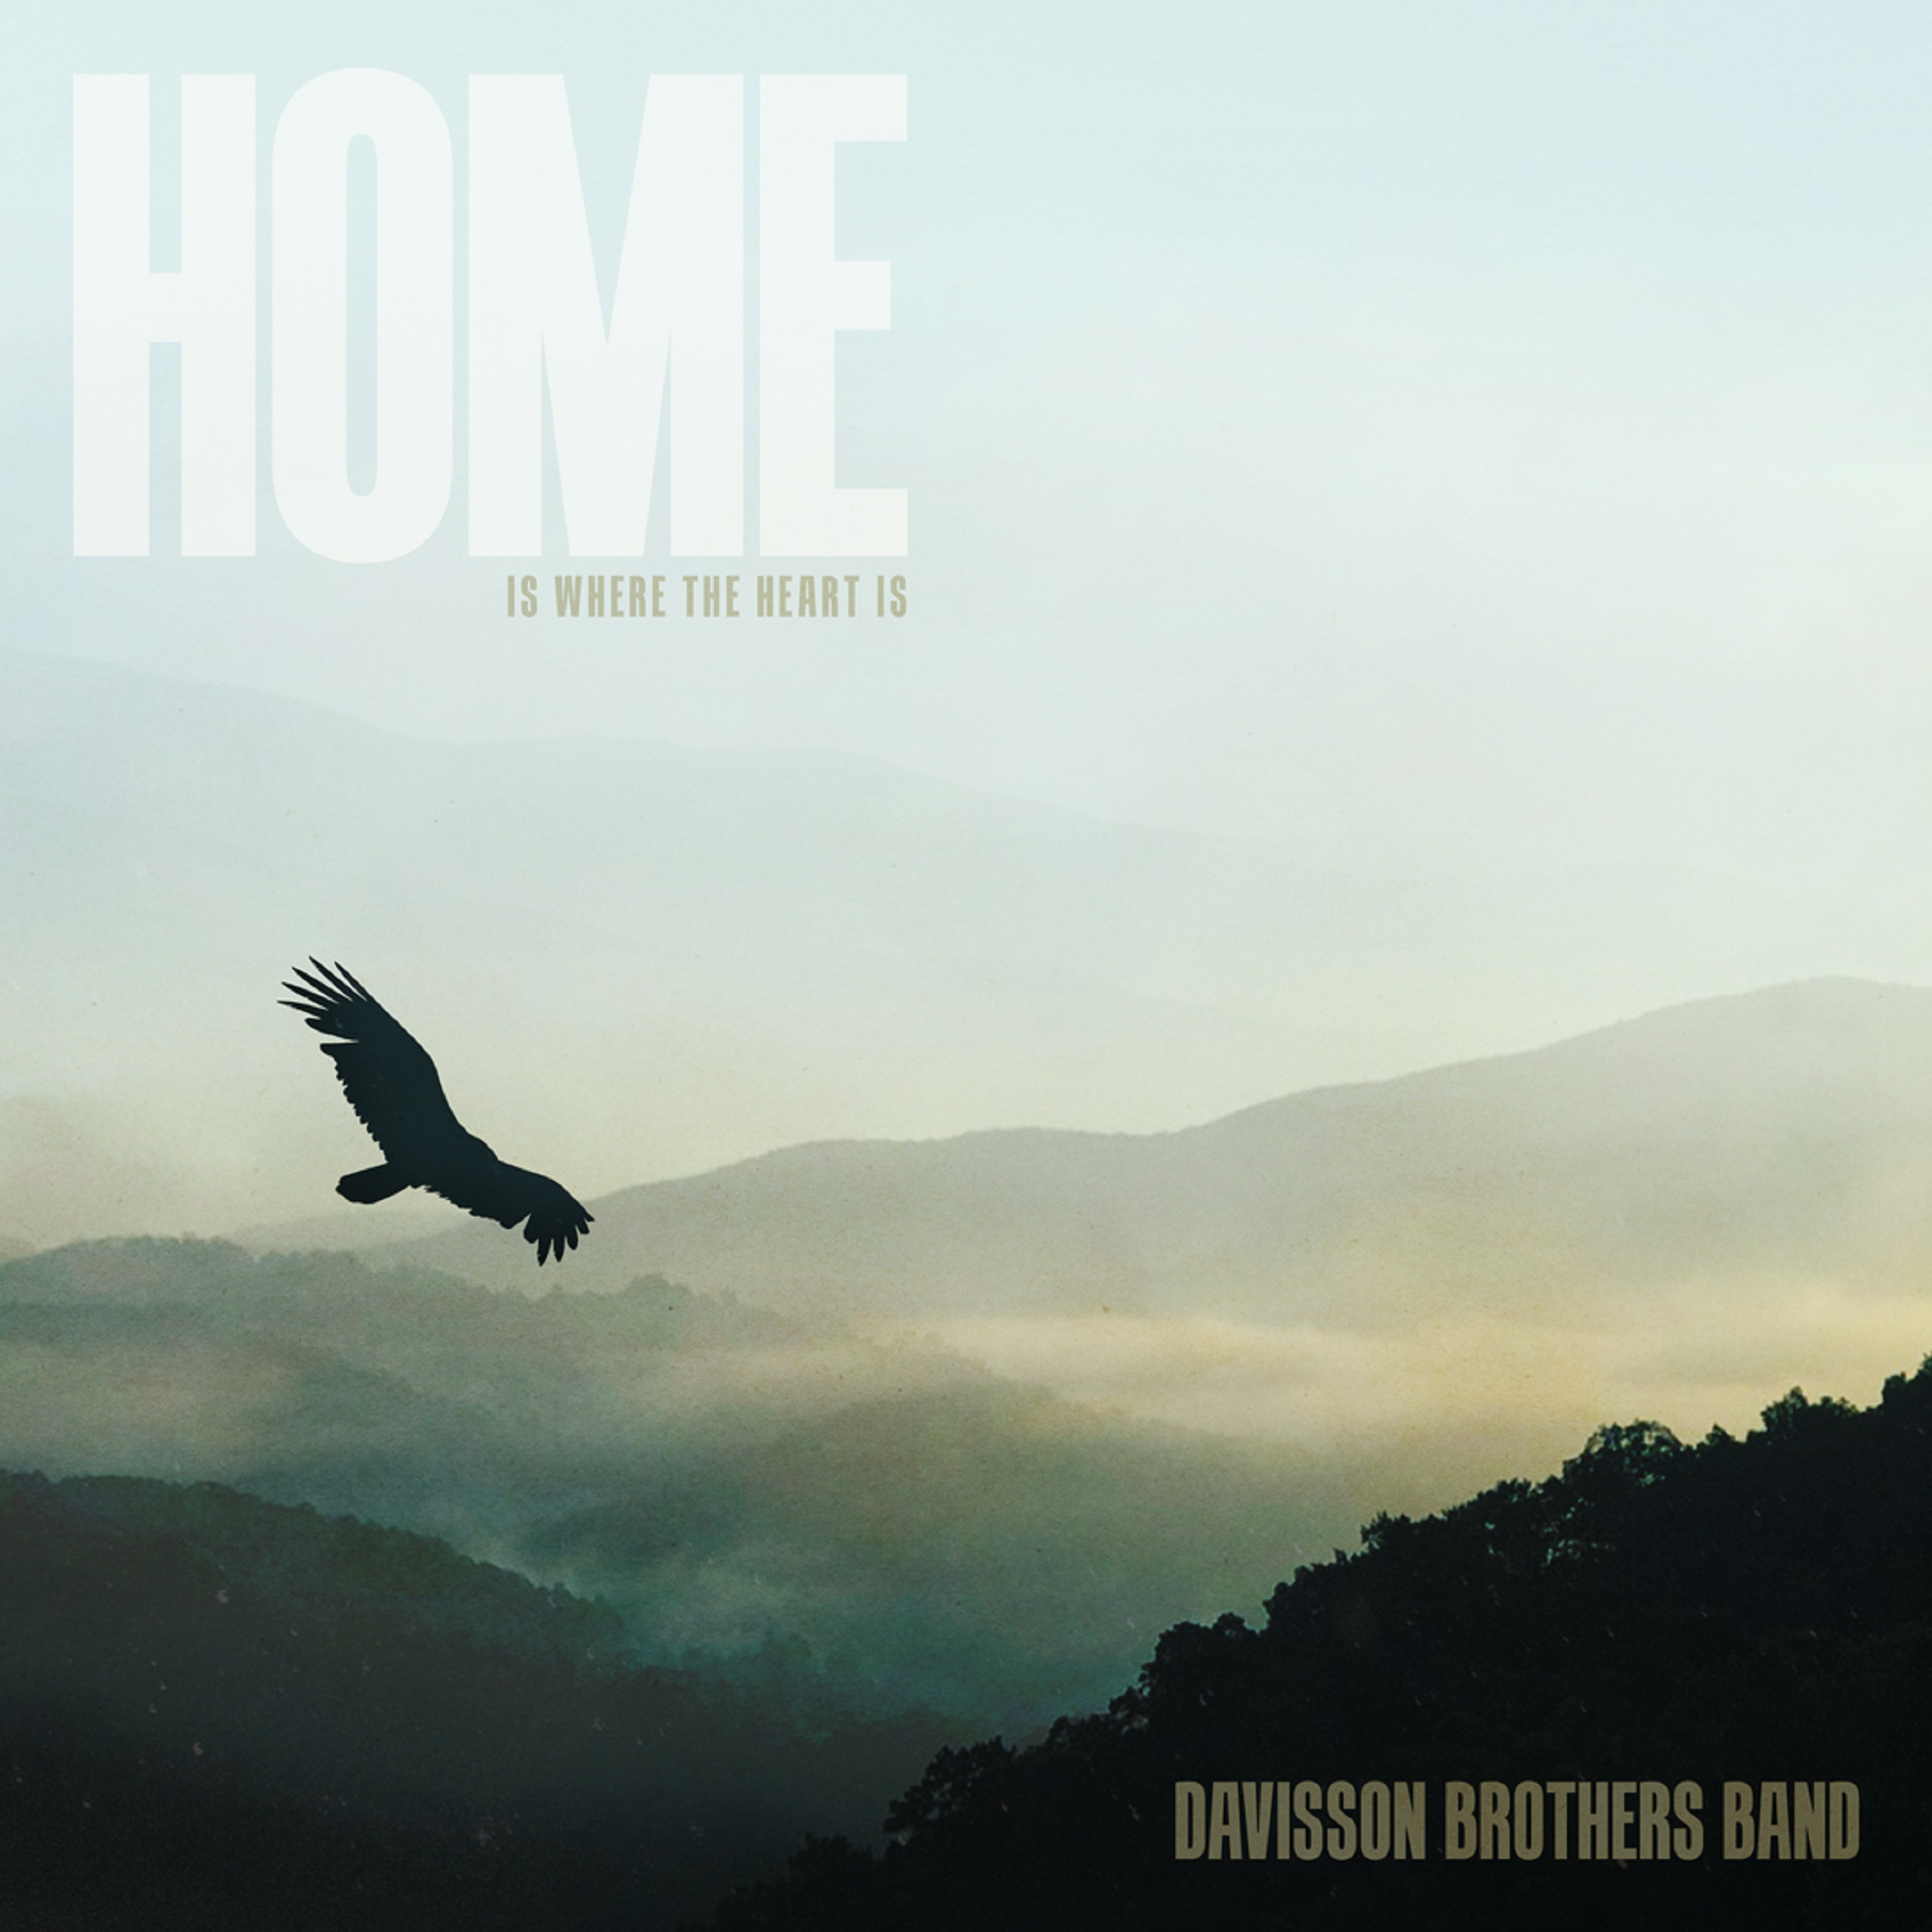 The Davisson Brothers Band Pen The Ultimate Love Letter To Their Stomping Grounds